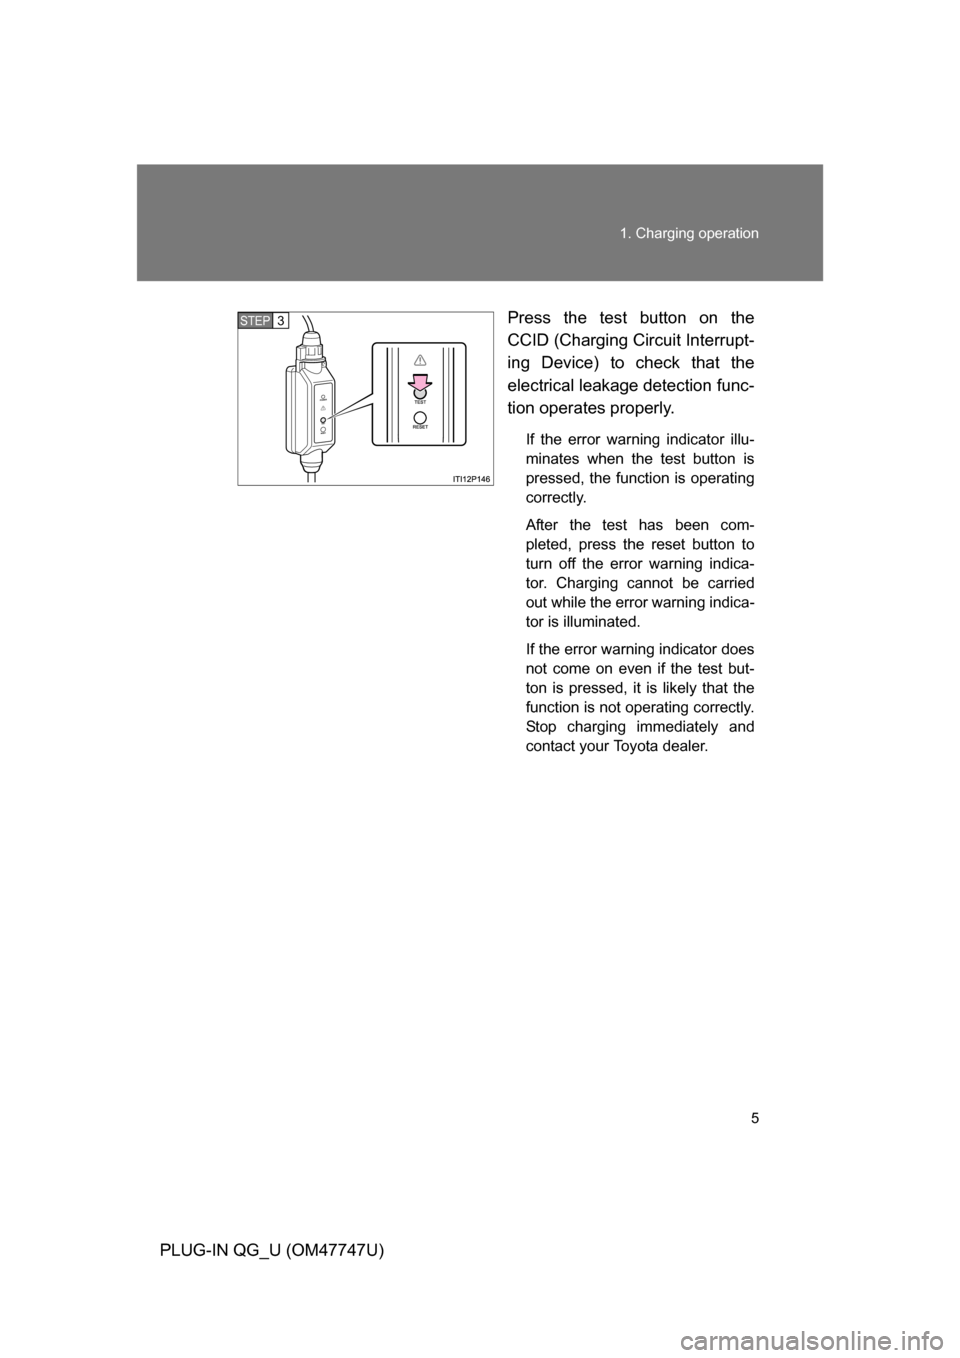 TOYOTA PRIUS PLUG-IN HYBRID 2012 1.G Owners Manual 5
1. Charging operation
PLUG-IN QG_U (OM47747U)
Press the test button on the
CCID (Charging Circuit Interrupt-
ing Device) to check that the
electrical leakage detection func-
tion operates properly.
